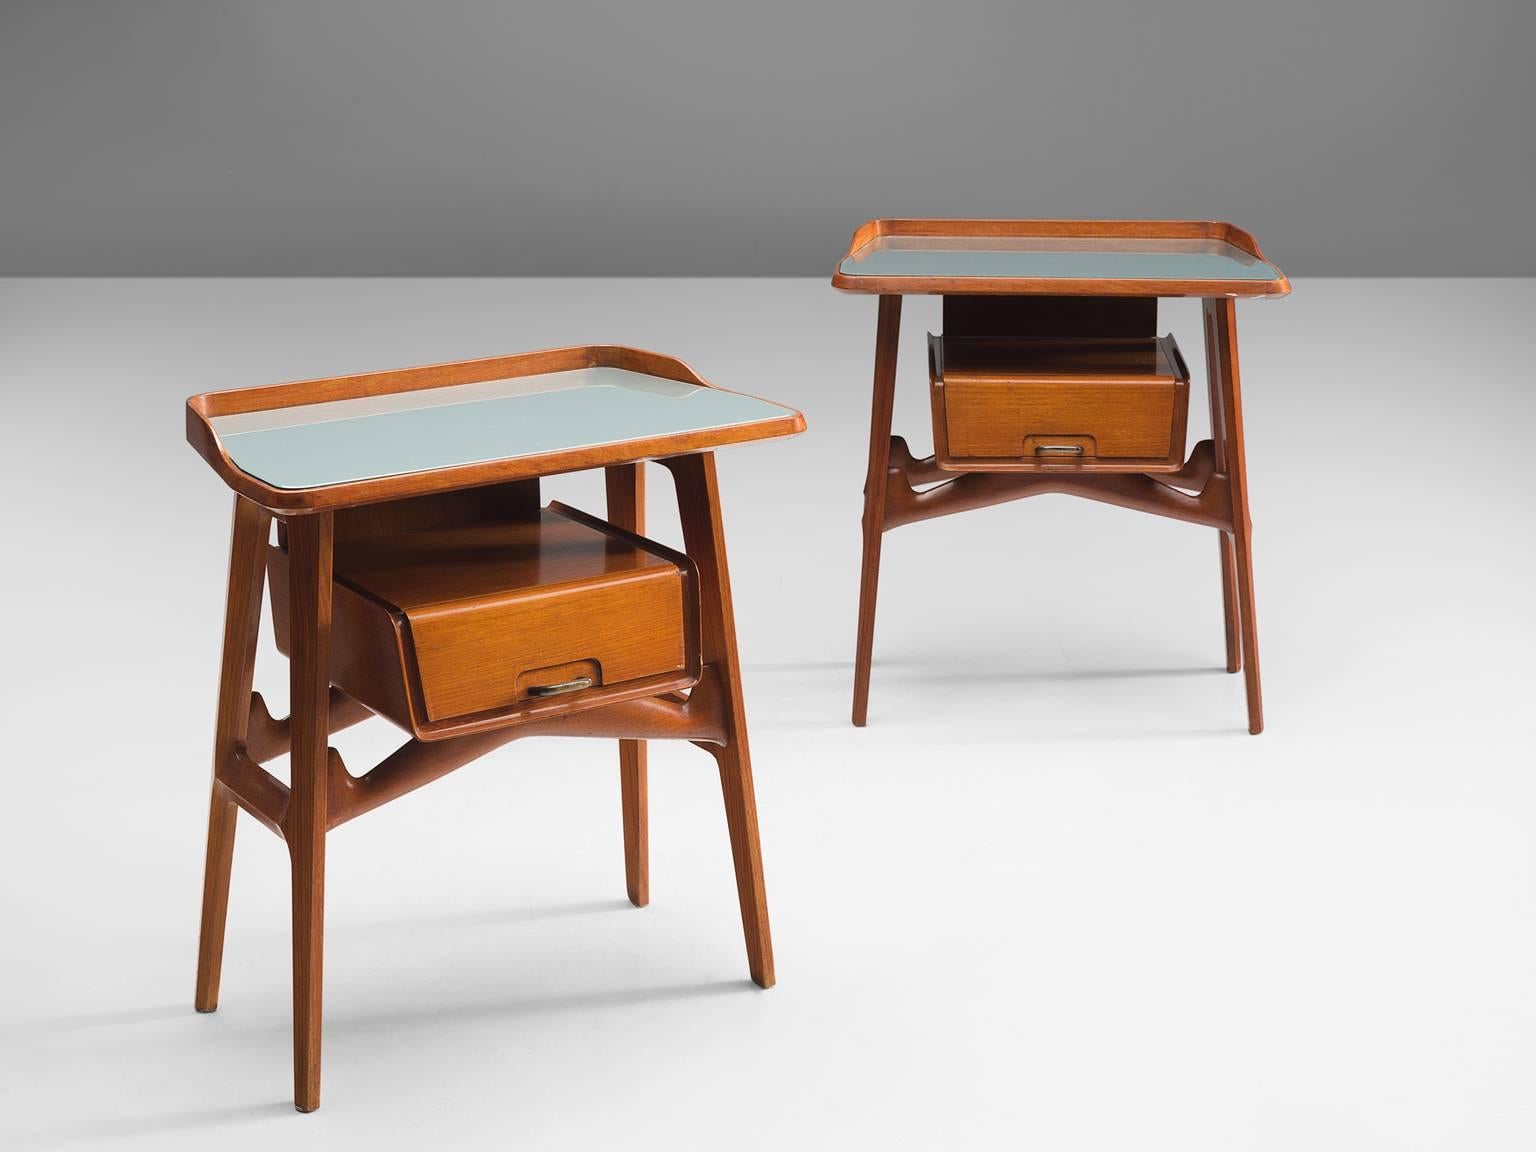 Side tables, fruitwood, glass, brass, Italy, circa 1950.

These two side tables or nightstands are both refined and elegant in every way. The glass top stretches a little but over the outer edges of the solid, precisely crafted legs. These